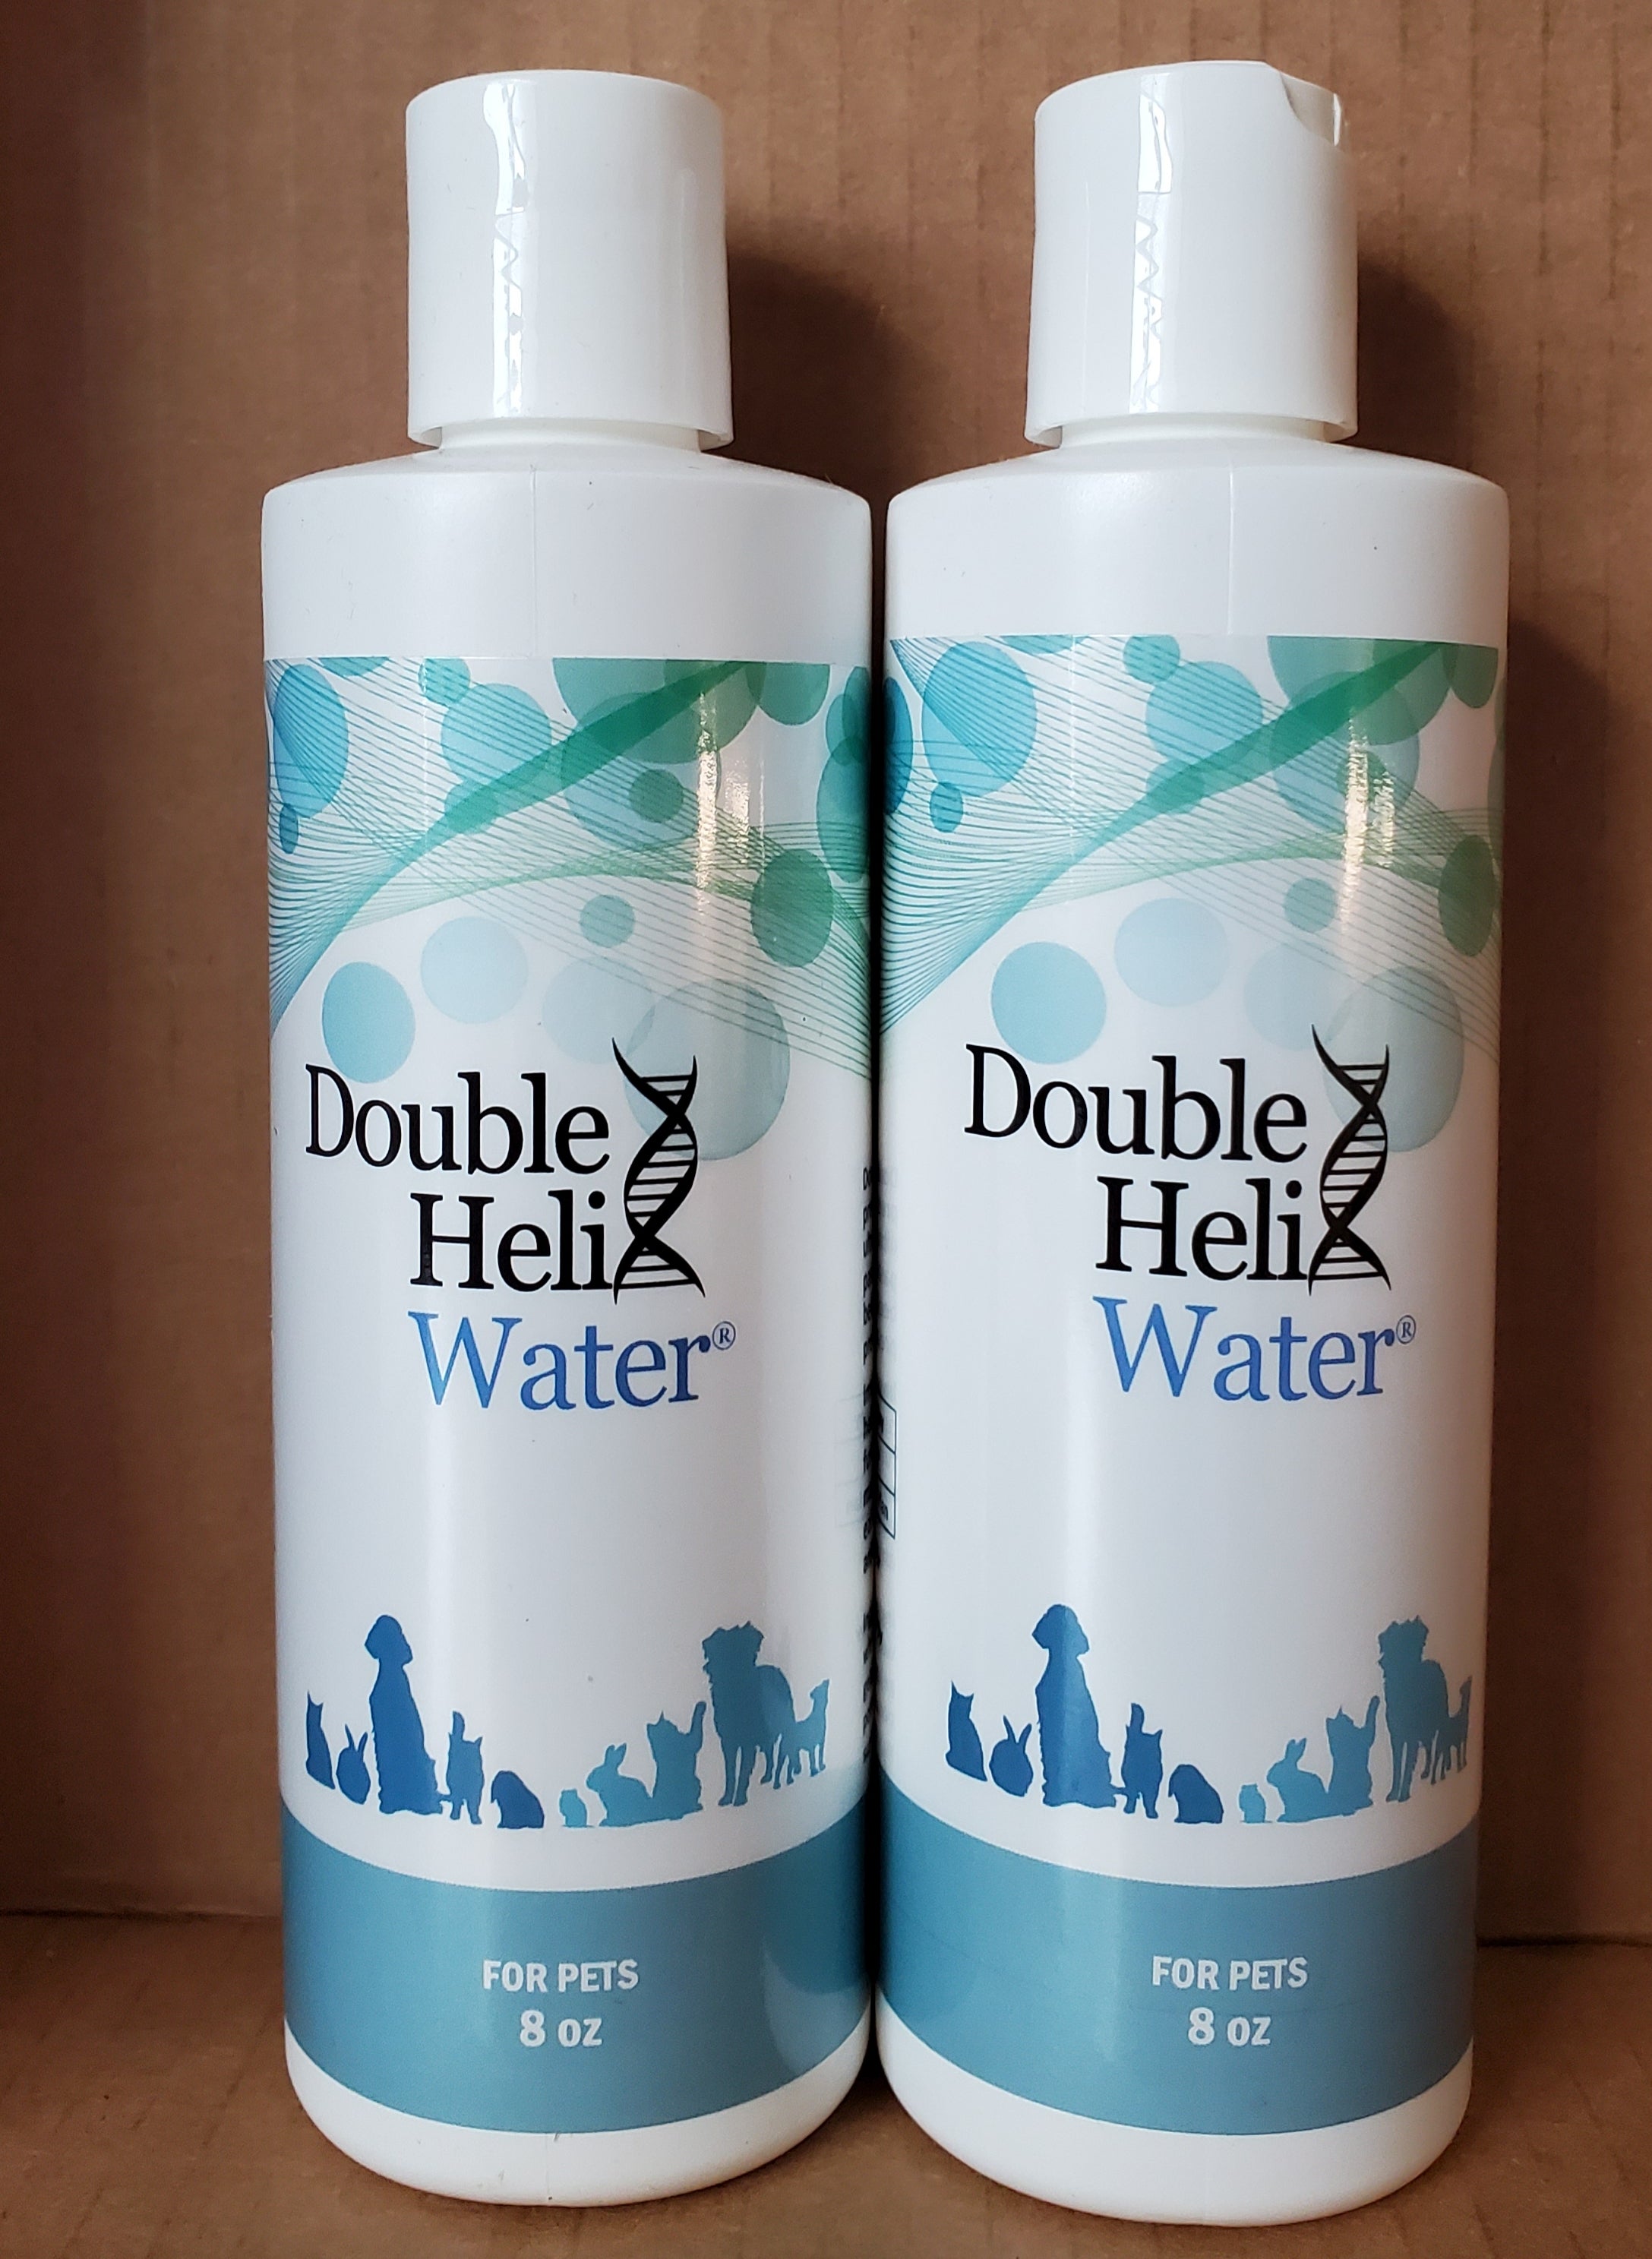 Double Helix Water for Pets